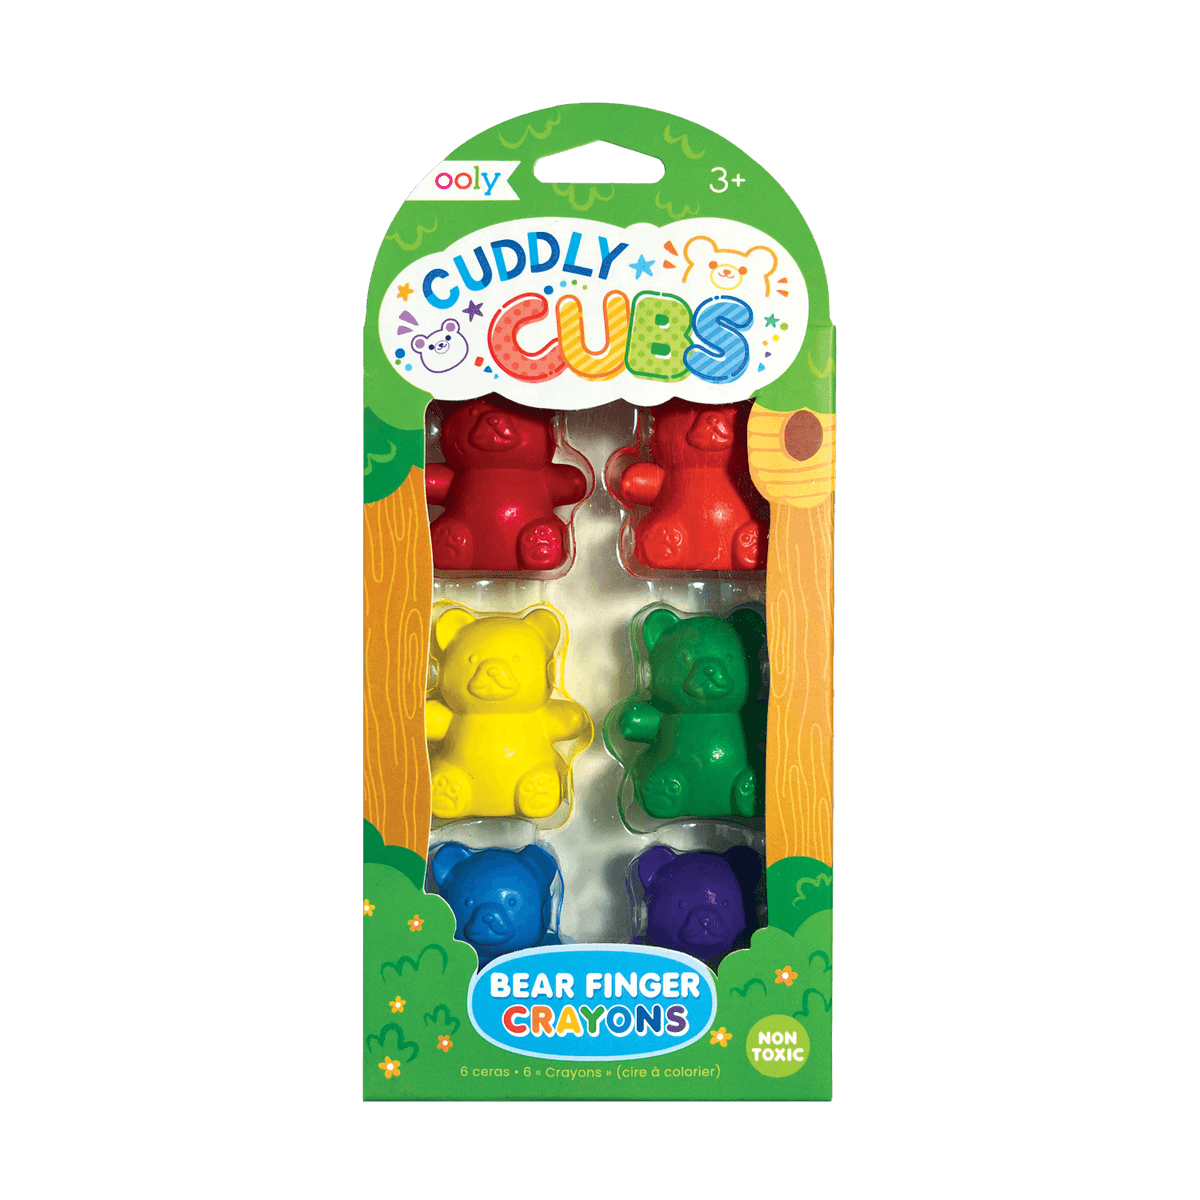 OOLY: Toddler's crayons for finger teddy bear cubdly cubs 6 pcs.